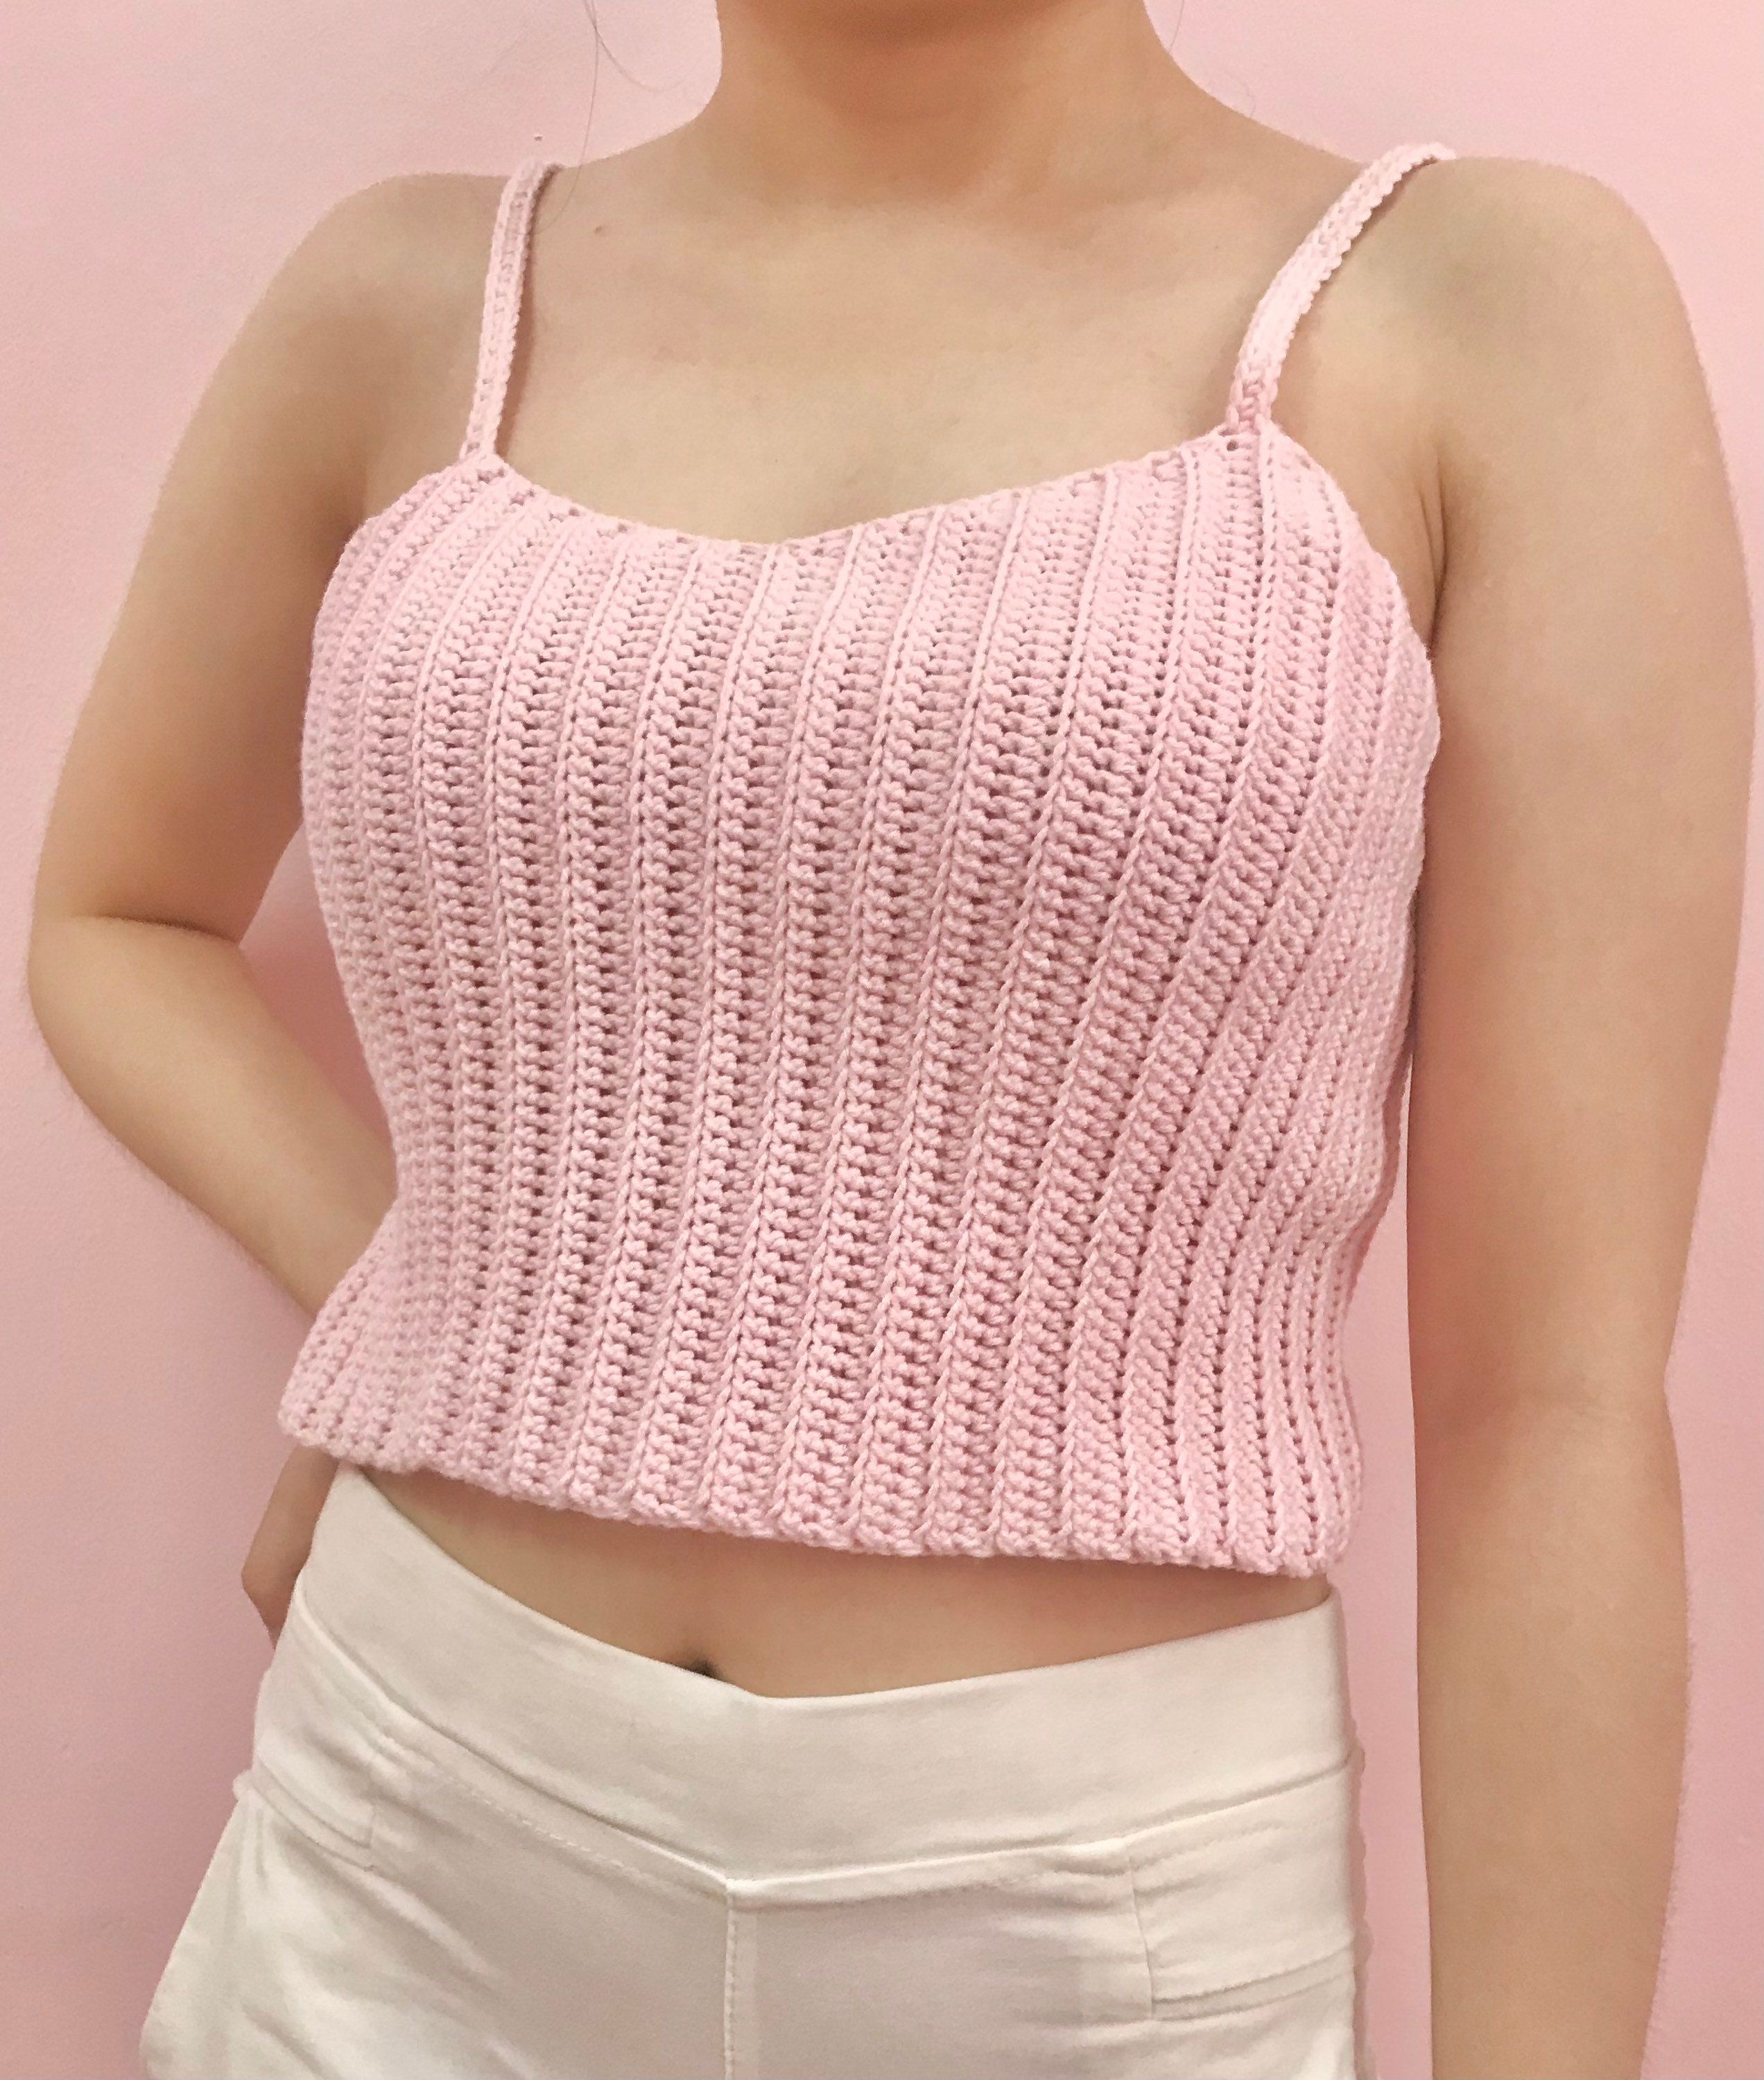 Ravelry: Skylar Ribbed Crop Top pattern by Grace Forthefrills